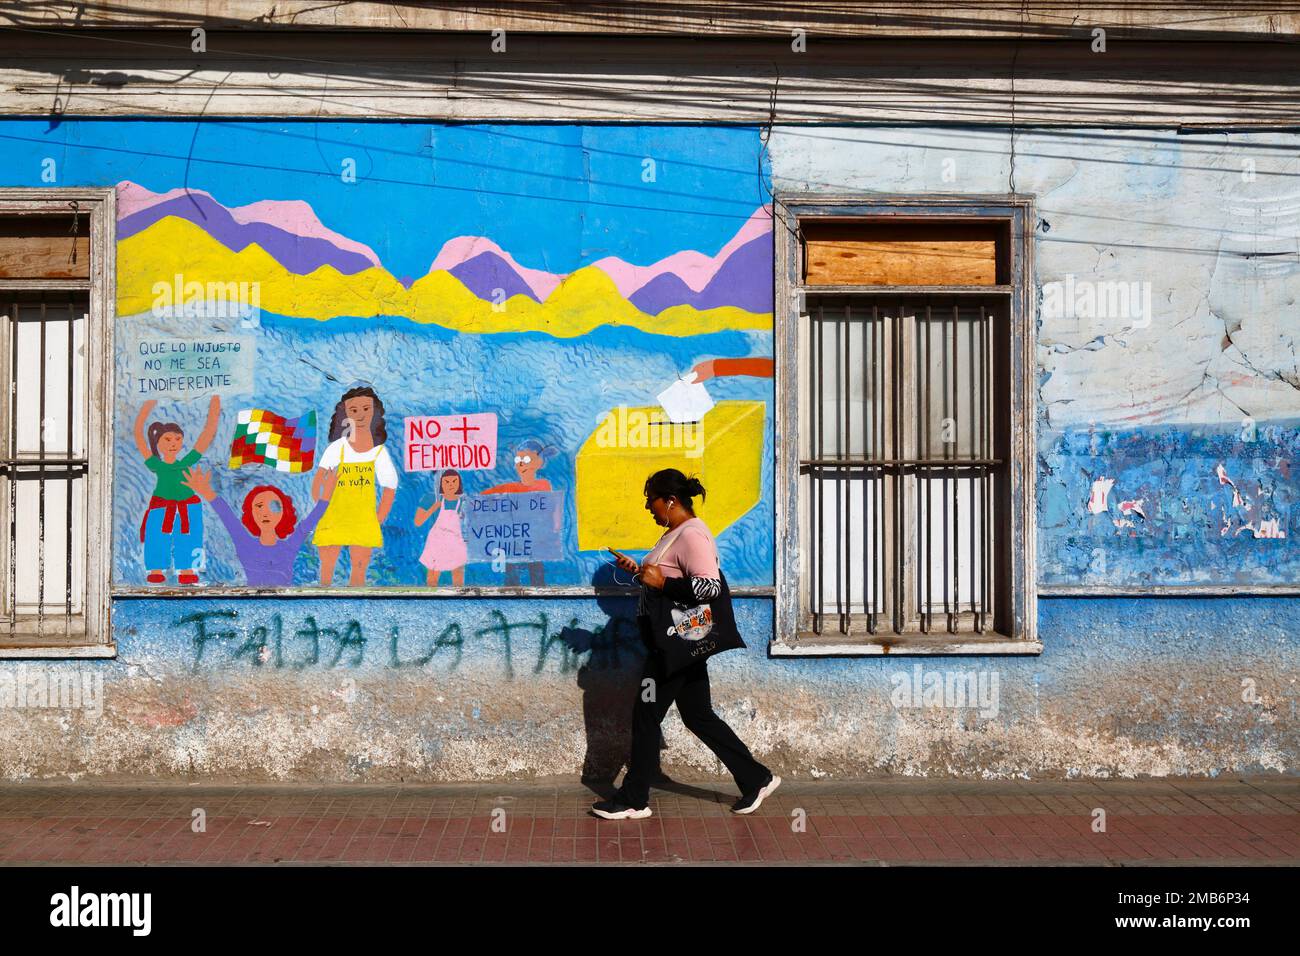 Woman walking past mural on wall of school protesting against violence against women and demanding equal rights for women, Copiapo, Region III, Chile Stock Photo